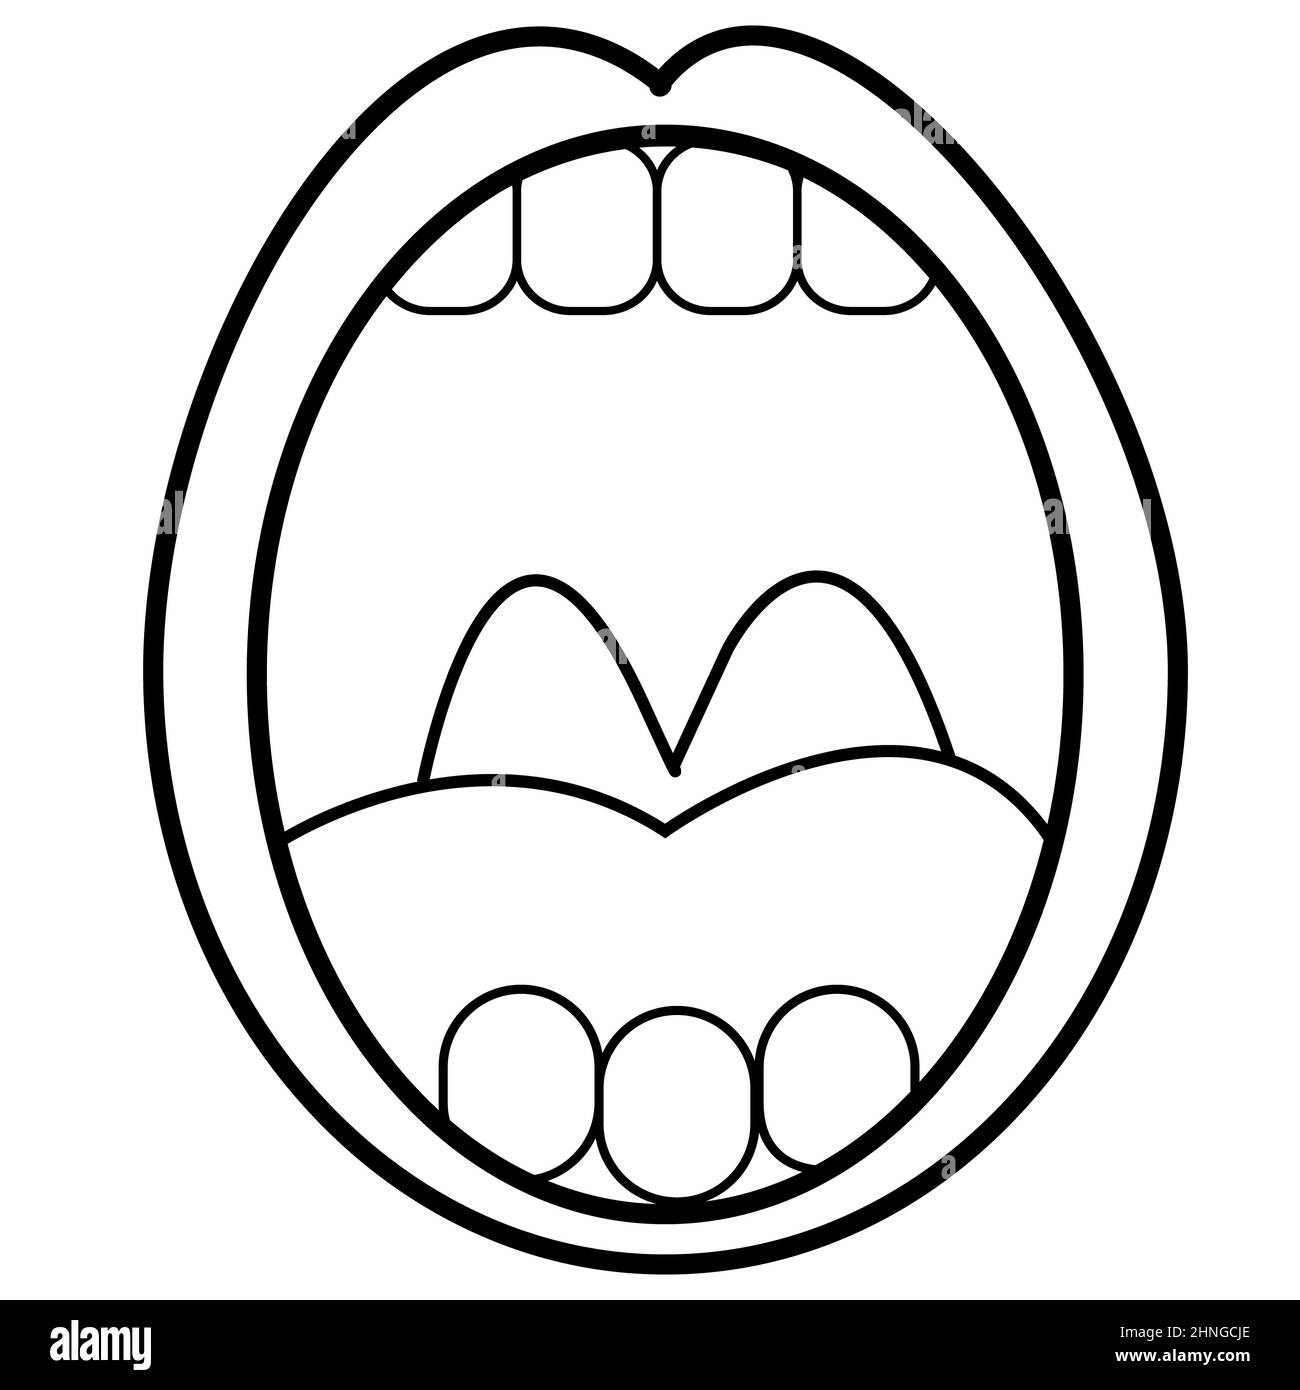 oral cavity icon on white background. Open mouth with teeth and tongue sign. throat oral symbol. flat style. Stock Photo